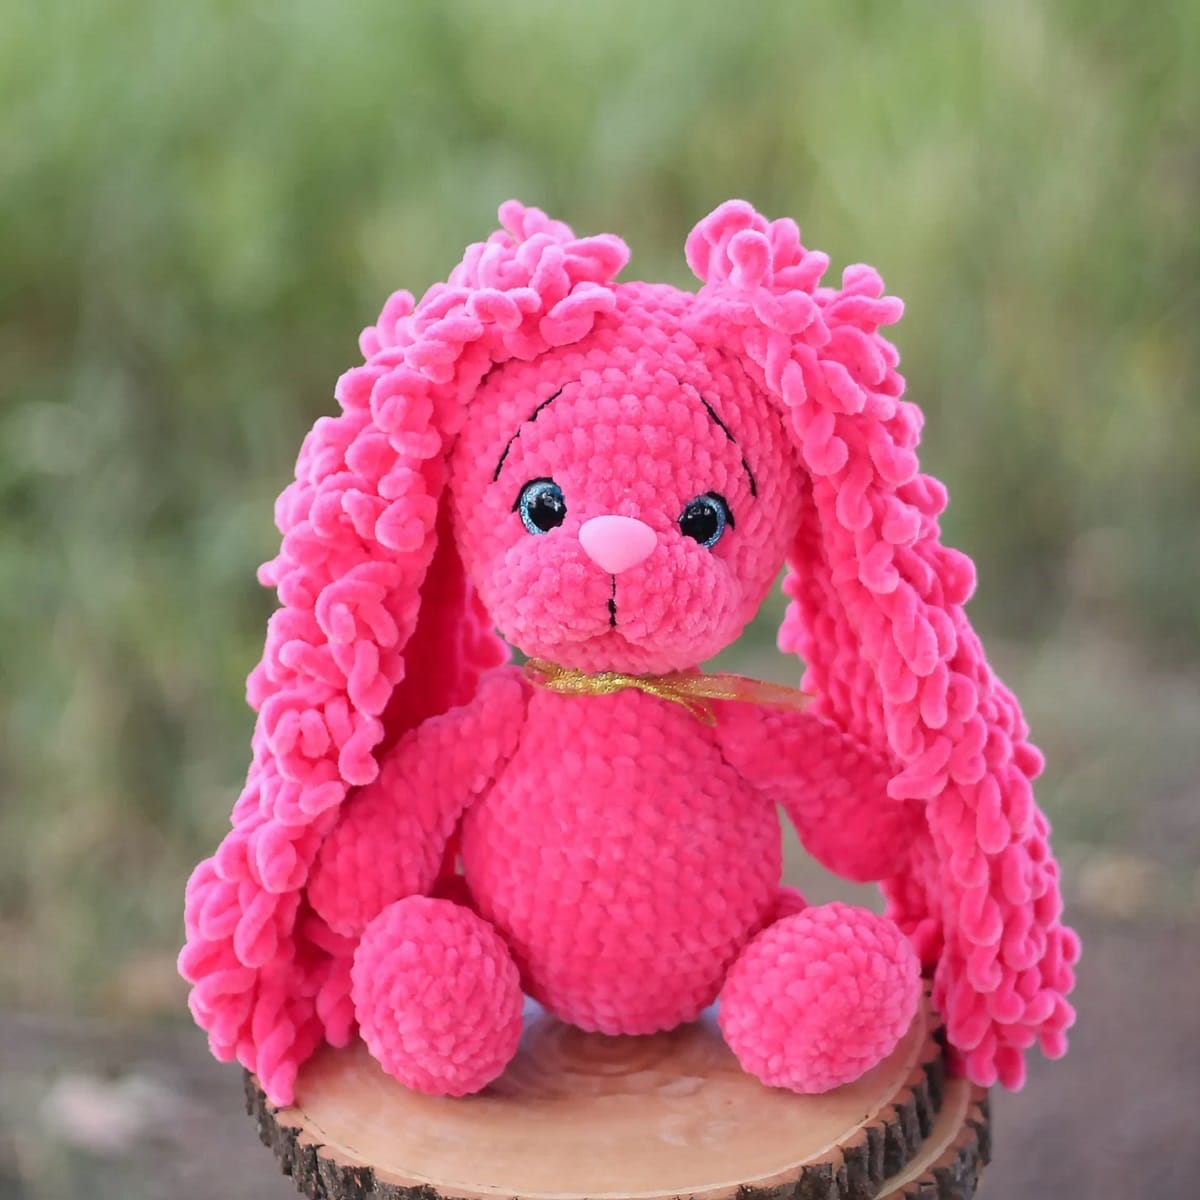 Pink crochet stuffed bunny you with oversized textured ears and a gold ribbon around its neck sat on a tree stump.